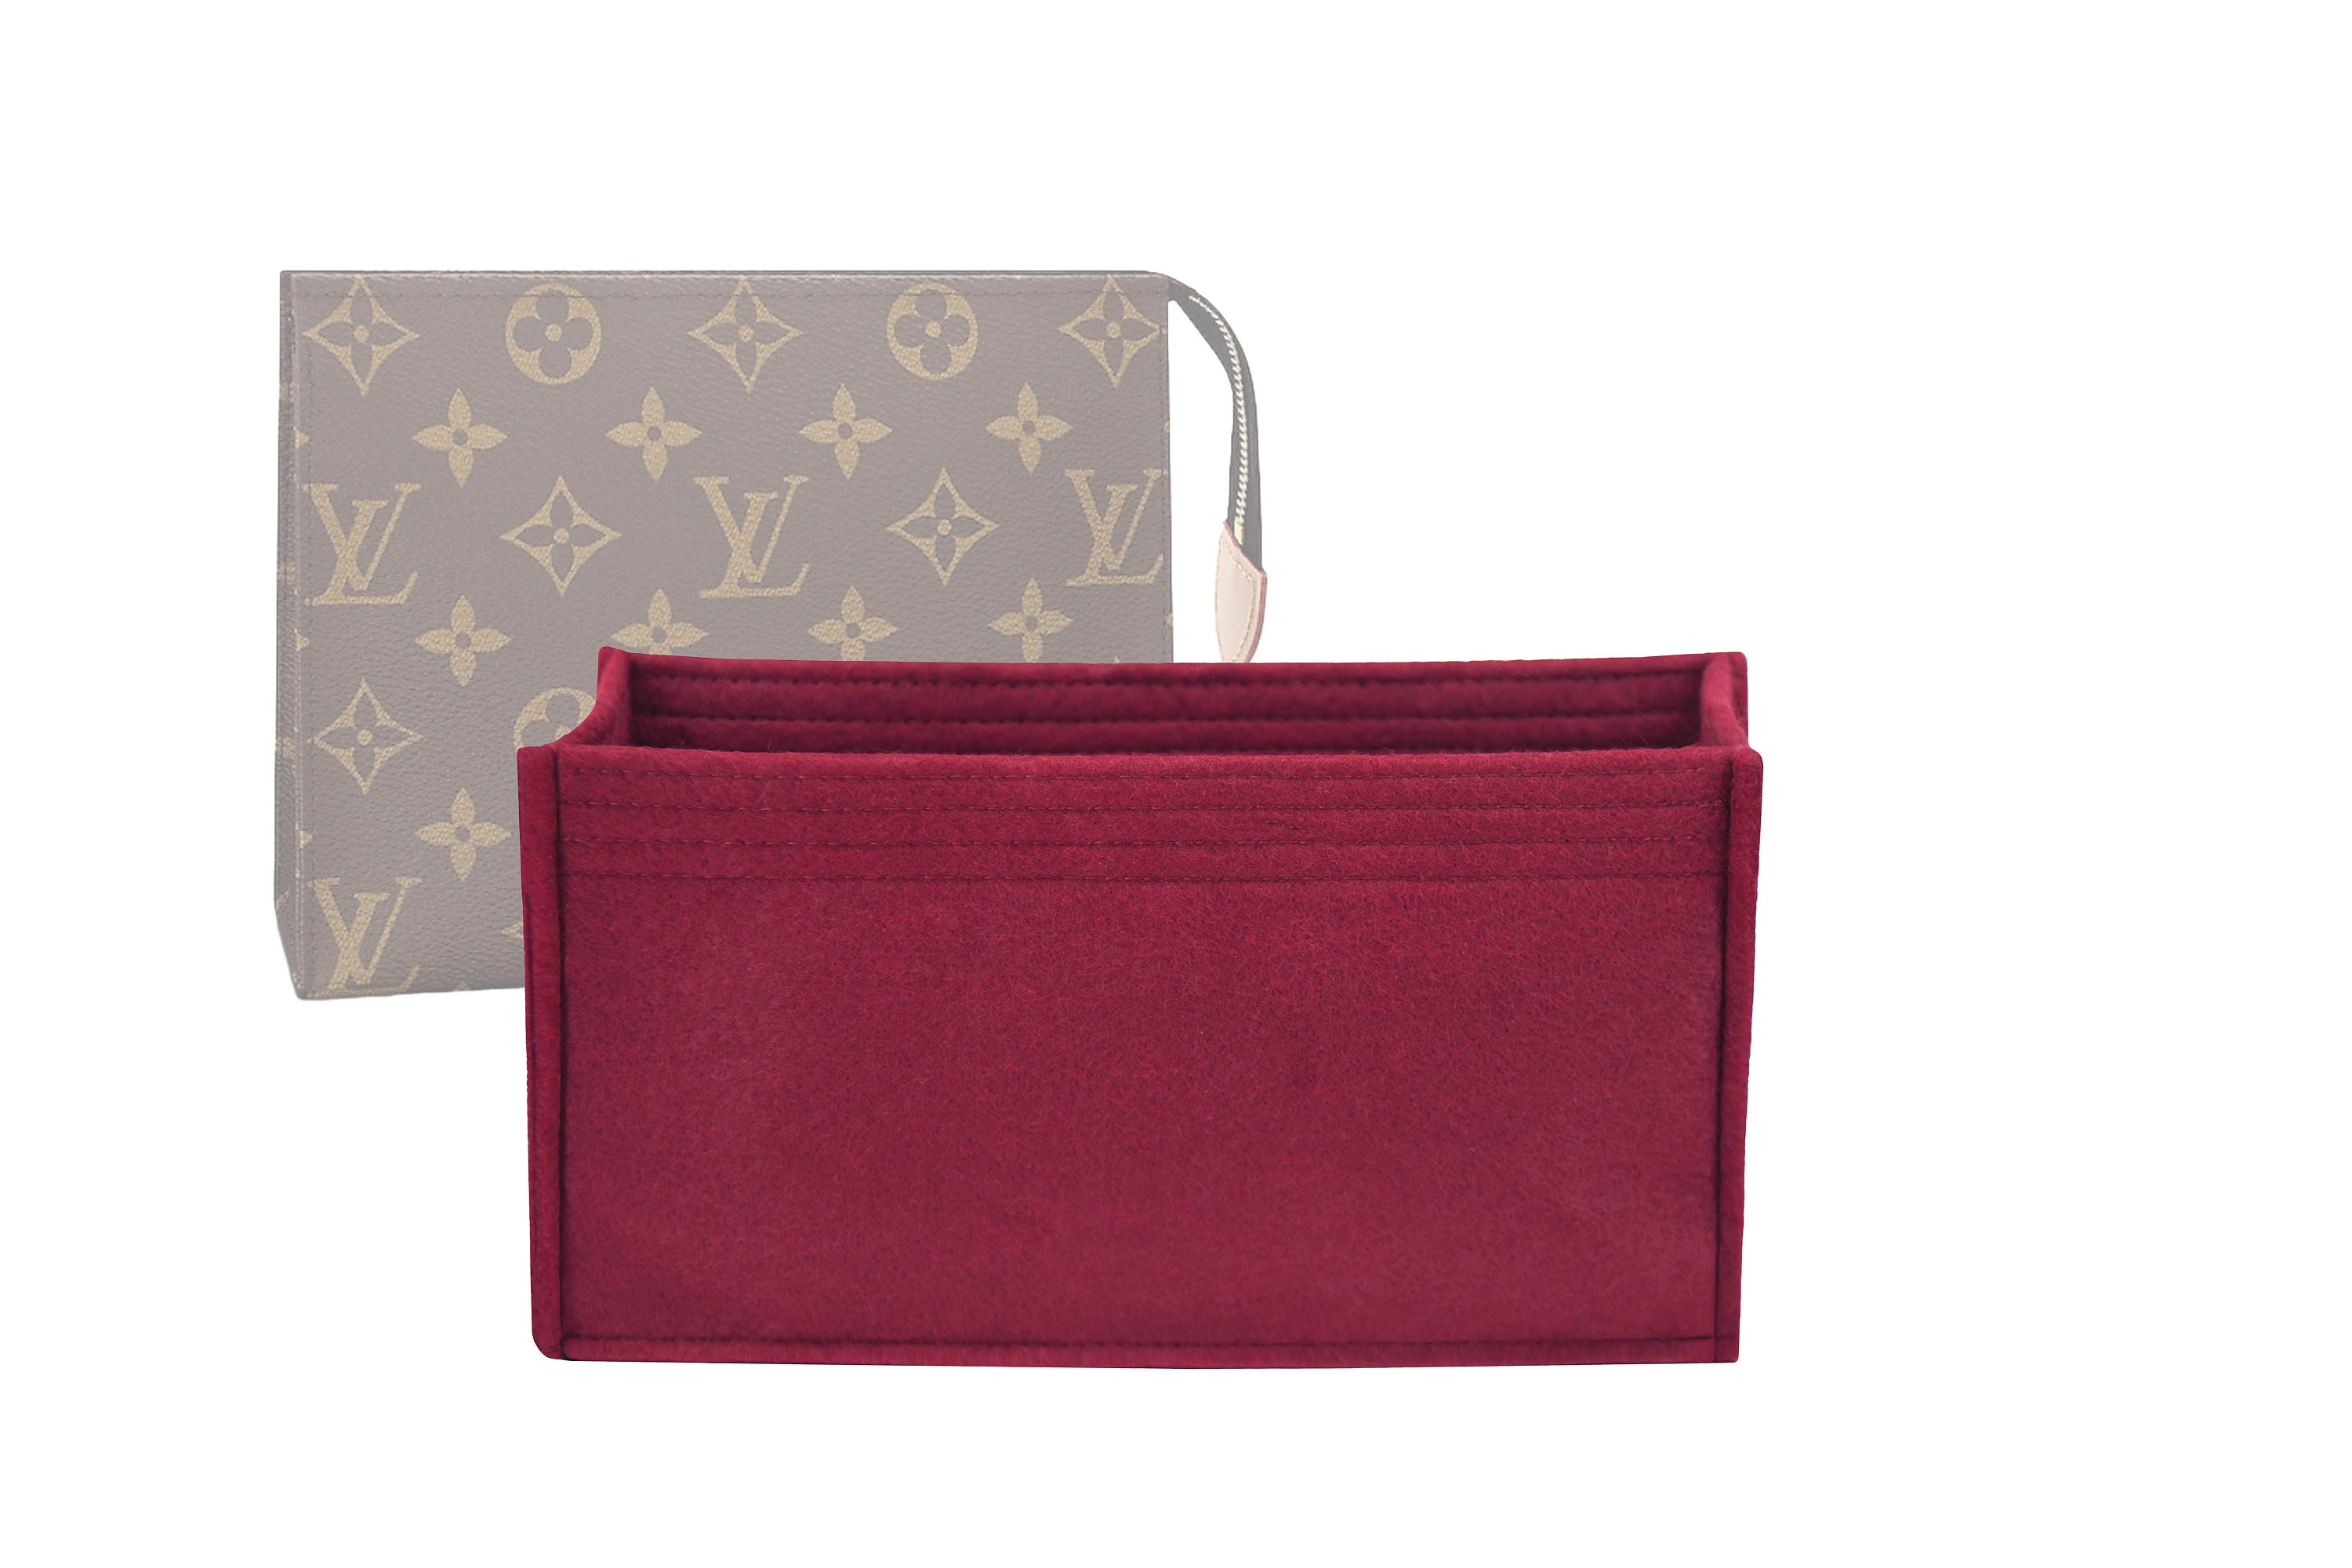 Vecord Felt Purse Insert Organizer LV 26 19 Toiletry Pouch Insert with D  Ring Attach Chain Strap Beige L : .in: Bags, Wallets and Luggage